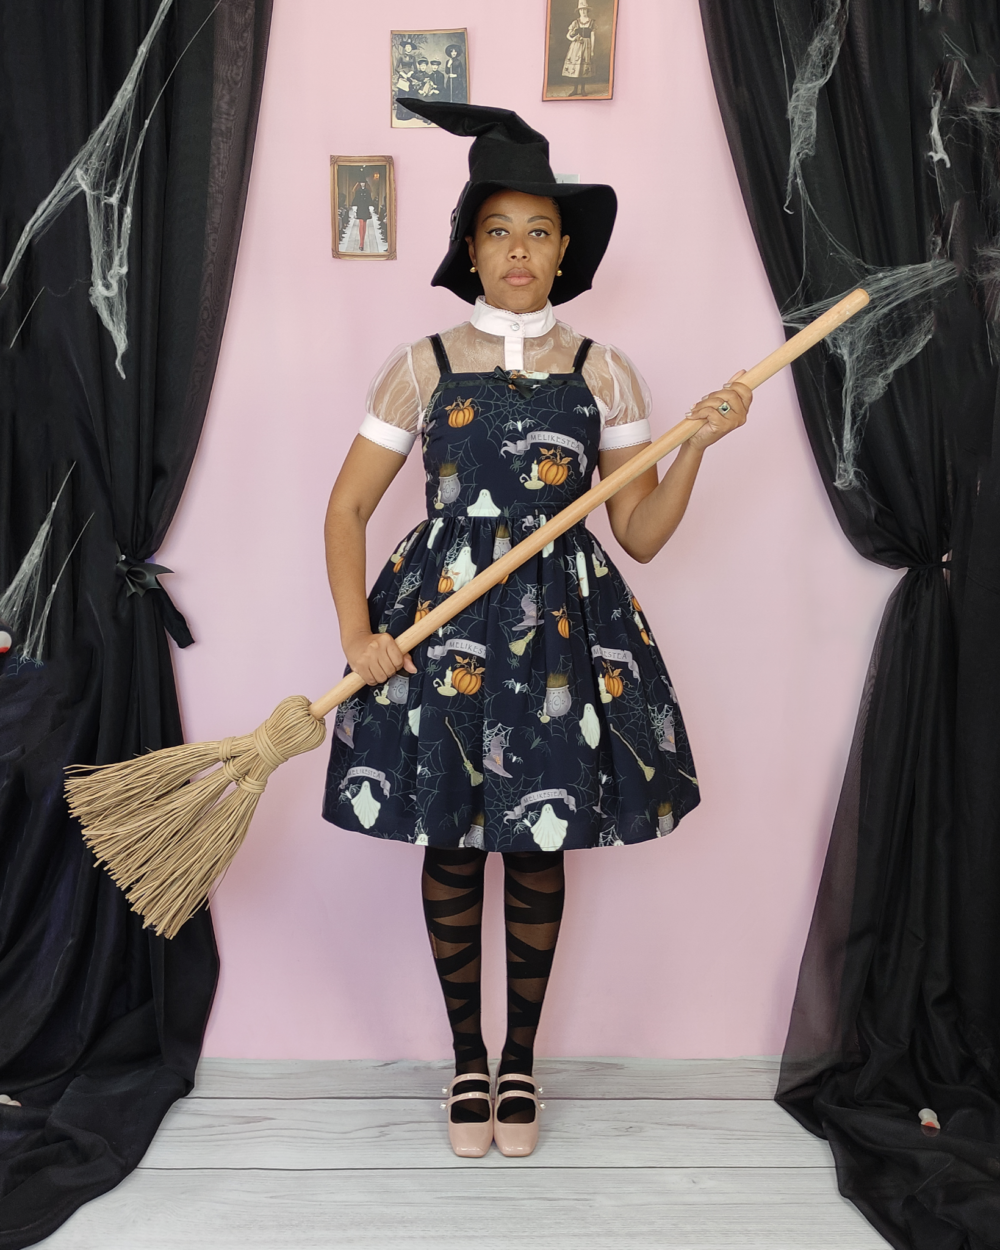 Witch wearing Halloween sleeveless dress in black and holding a broomstick